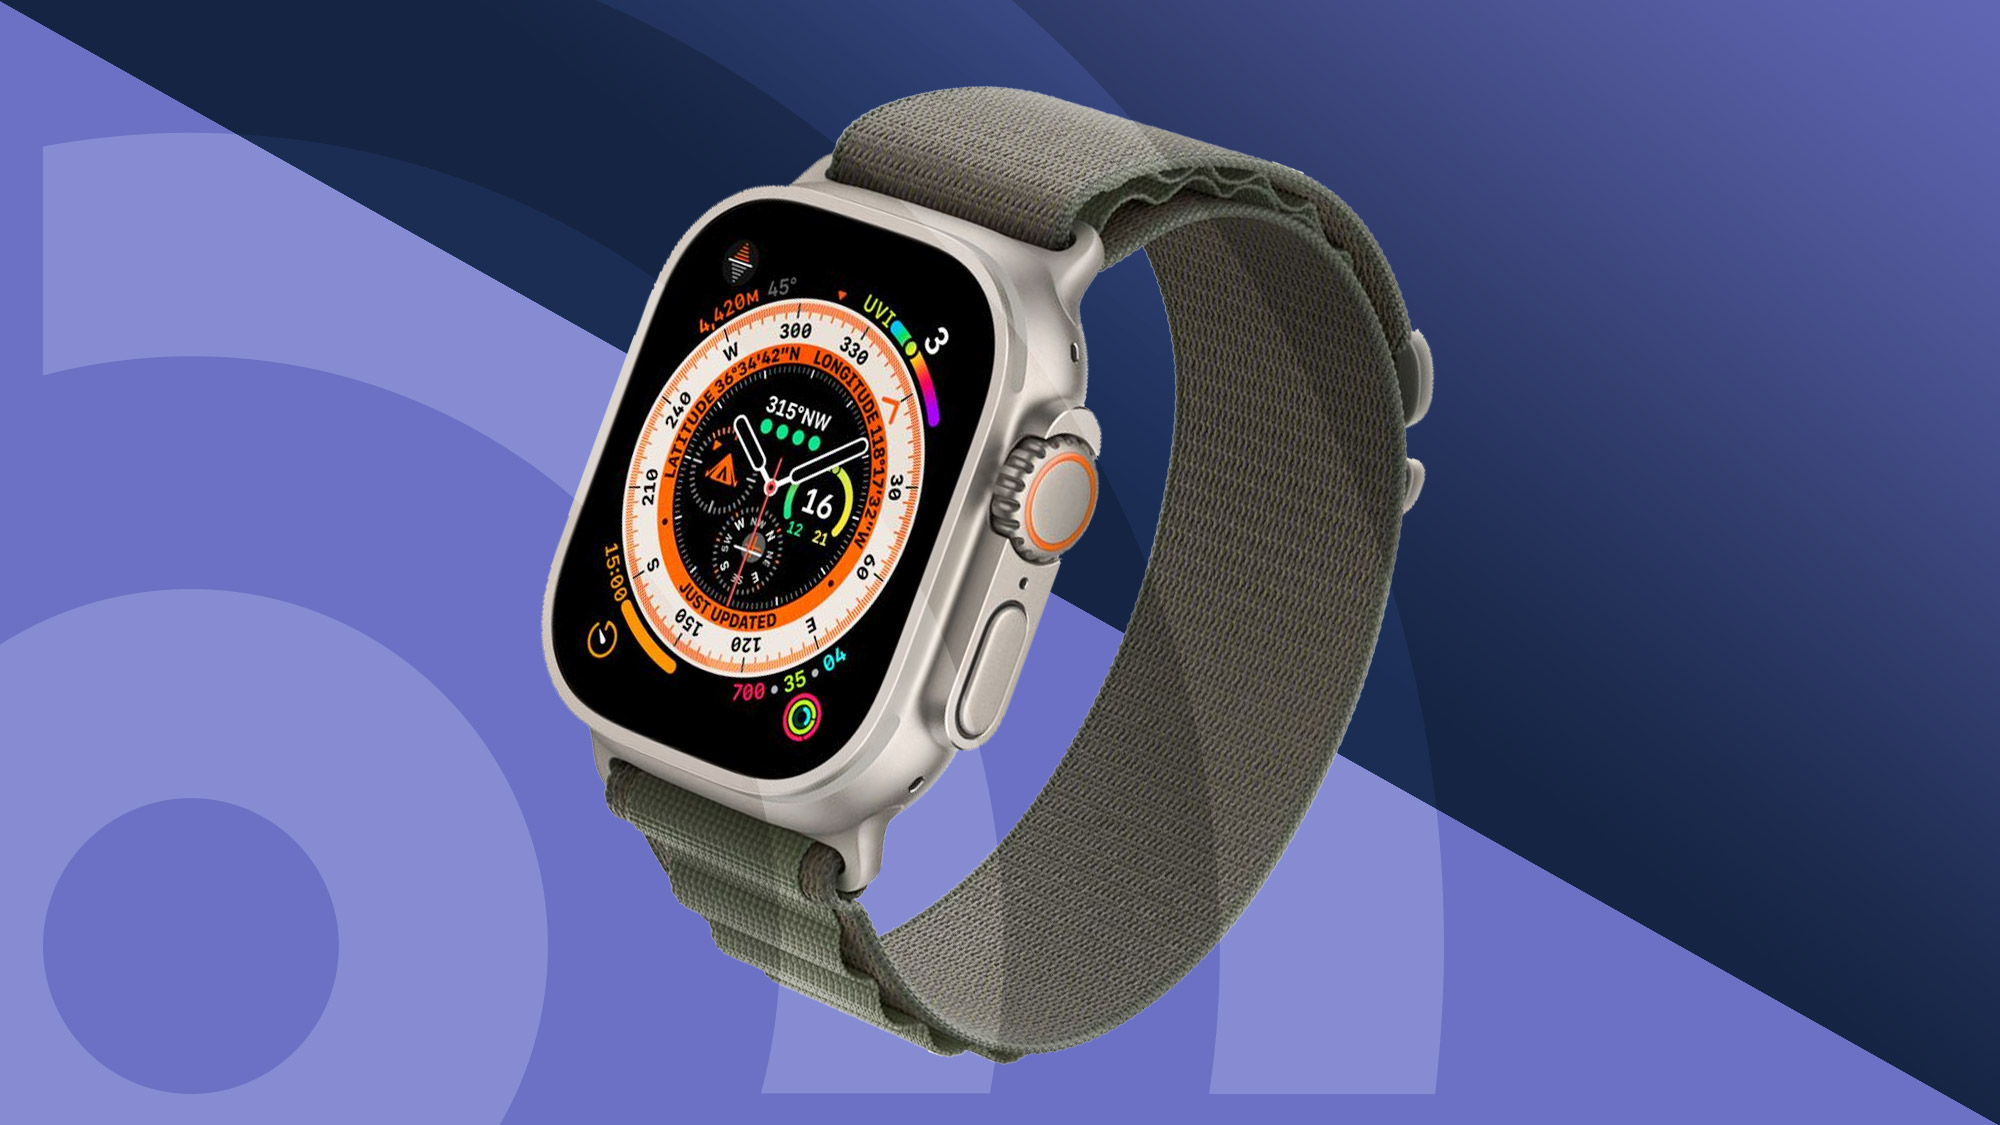 Apple Watch Pro: The Most Exciting New Watch May Match iPhone 14